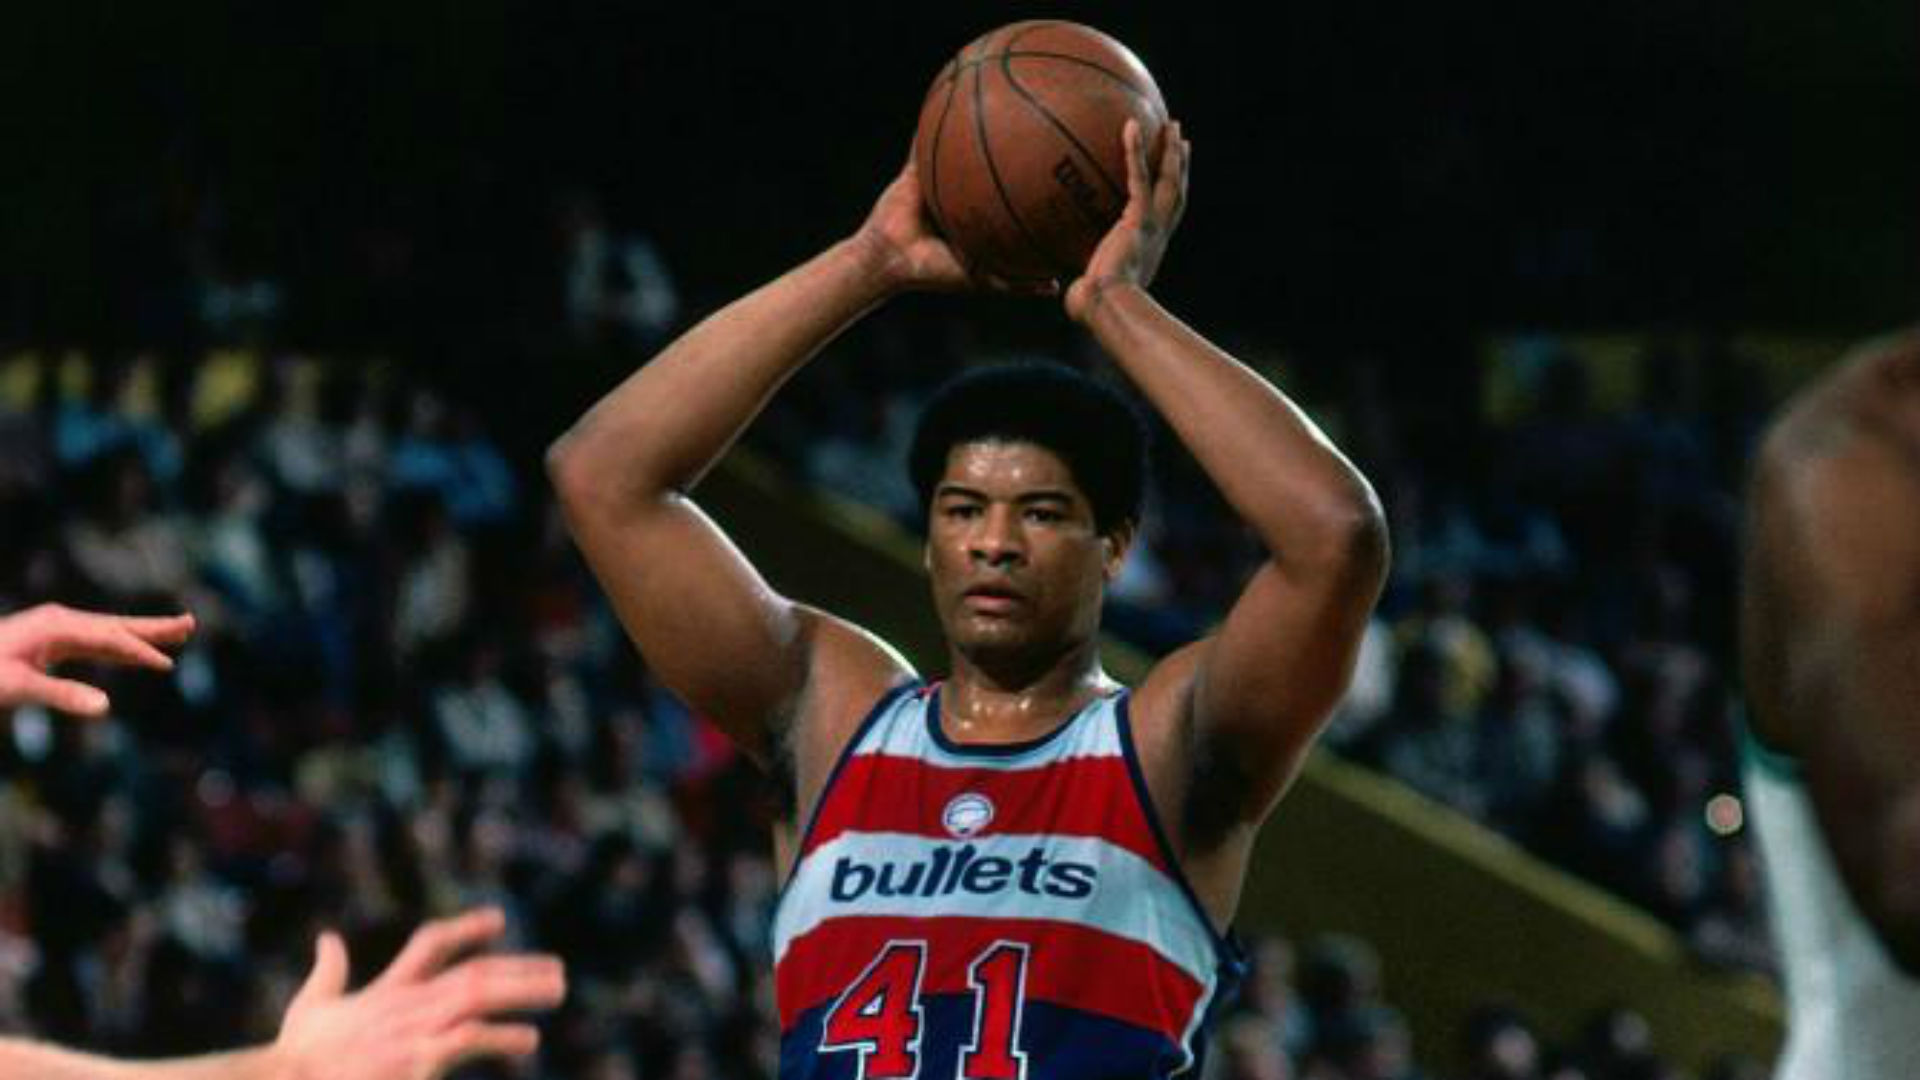 The Washington Wizards announced on Tuesday that Hall of Fame center Wes Unseld died after developing pneumonia.